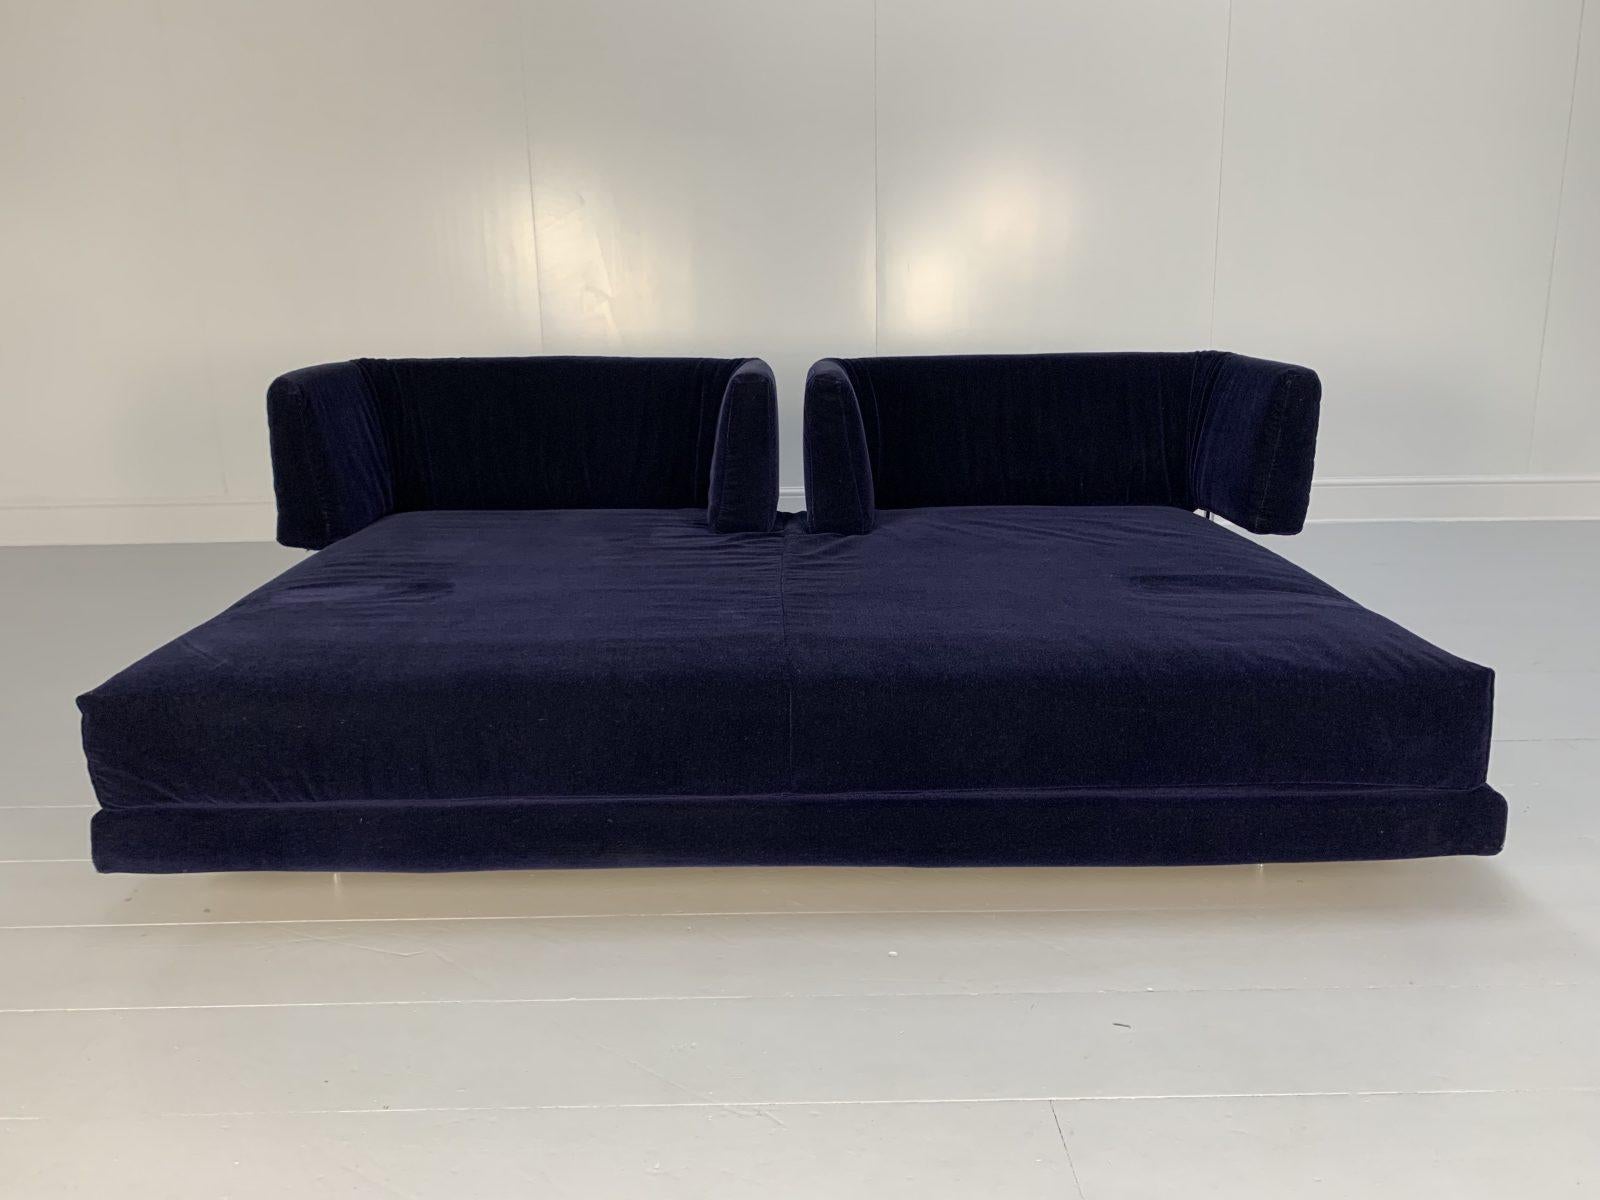 This is an exceptionally-rare example of the iconic “L’Homme Et La Femme” Daybed Sofa, from the world renown Italian furniture house of Edra.

In a world of temporary pleasures, Edra create beautiful furniture that remains a joy forever.

With